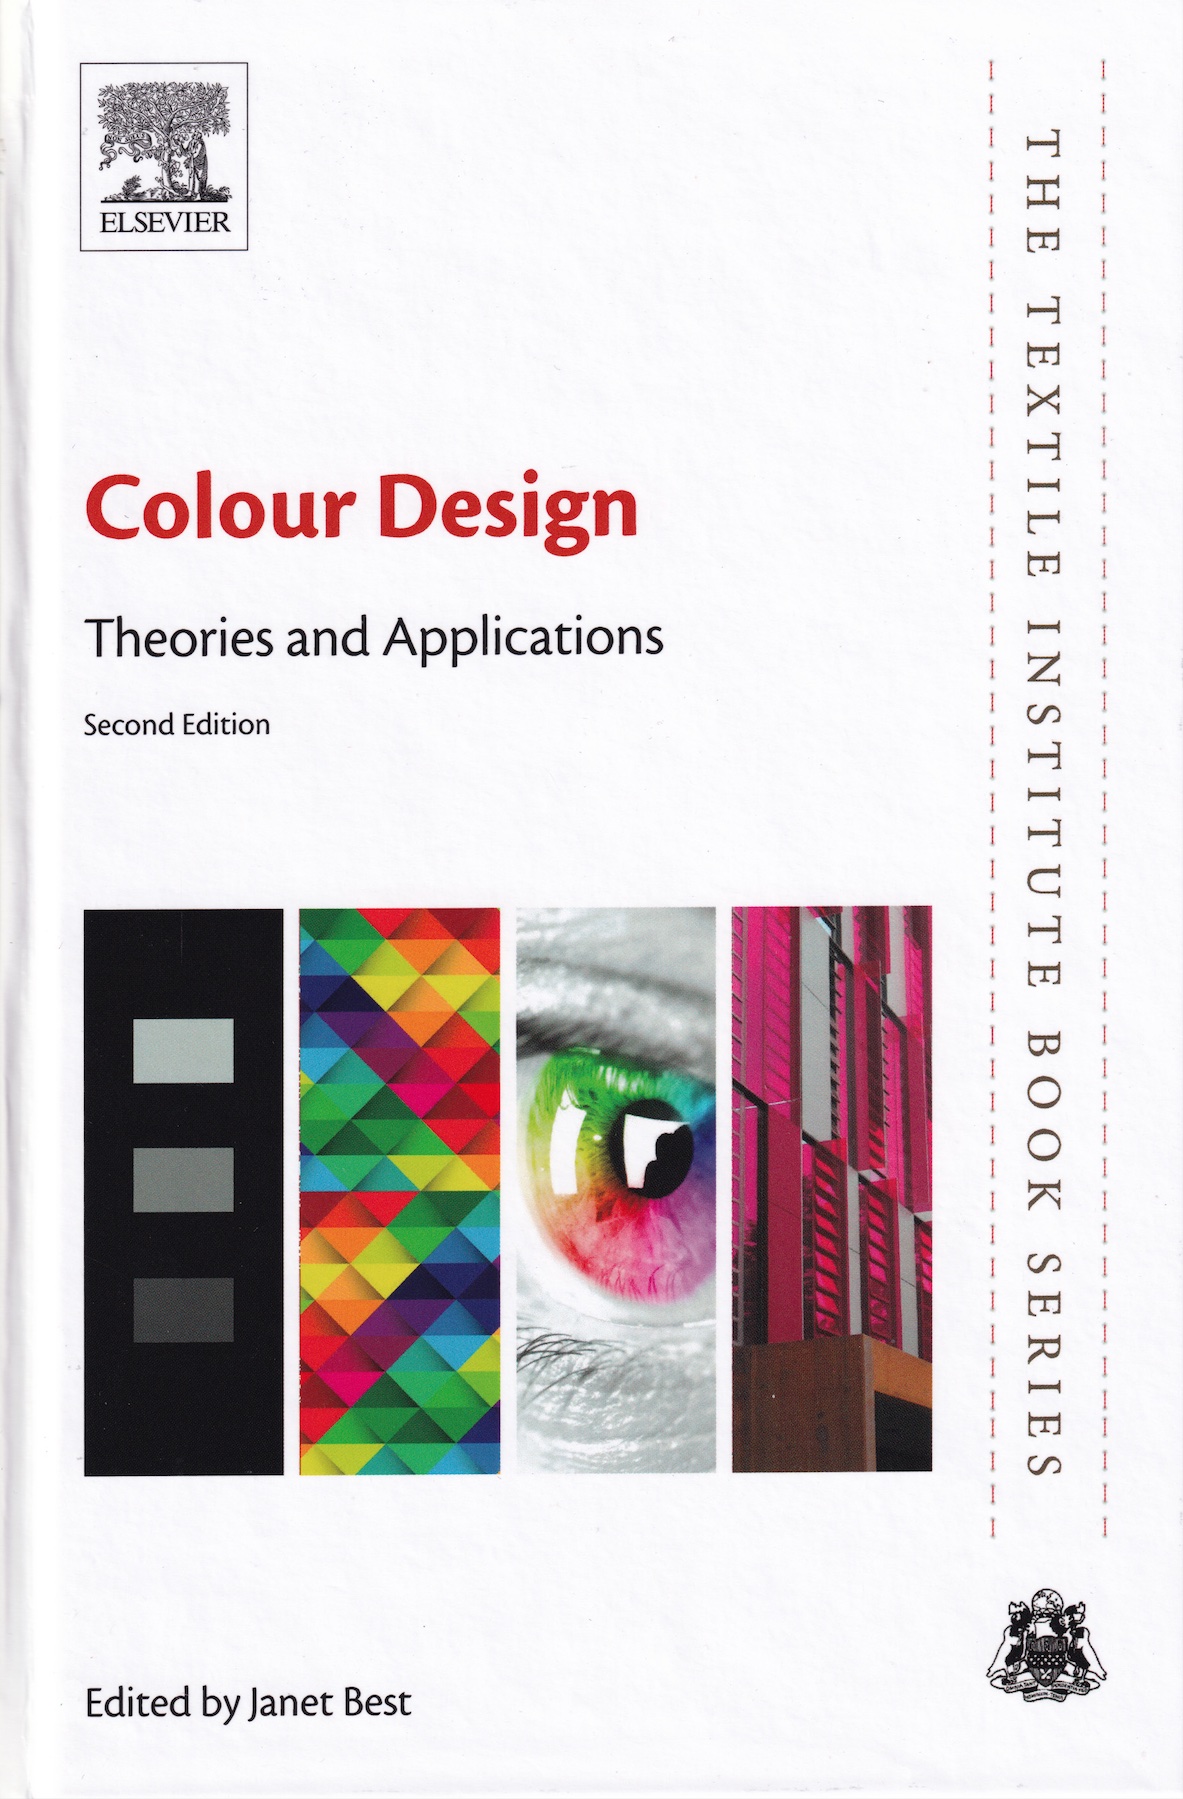 Colour Design Theories and Applications. Second Edition, 2017